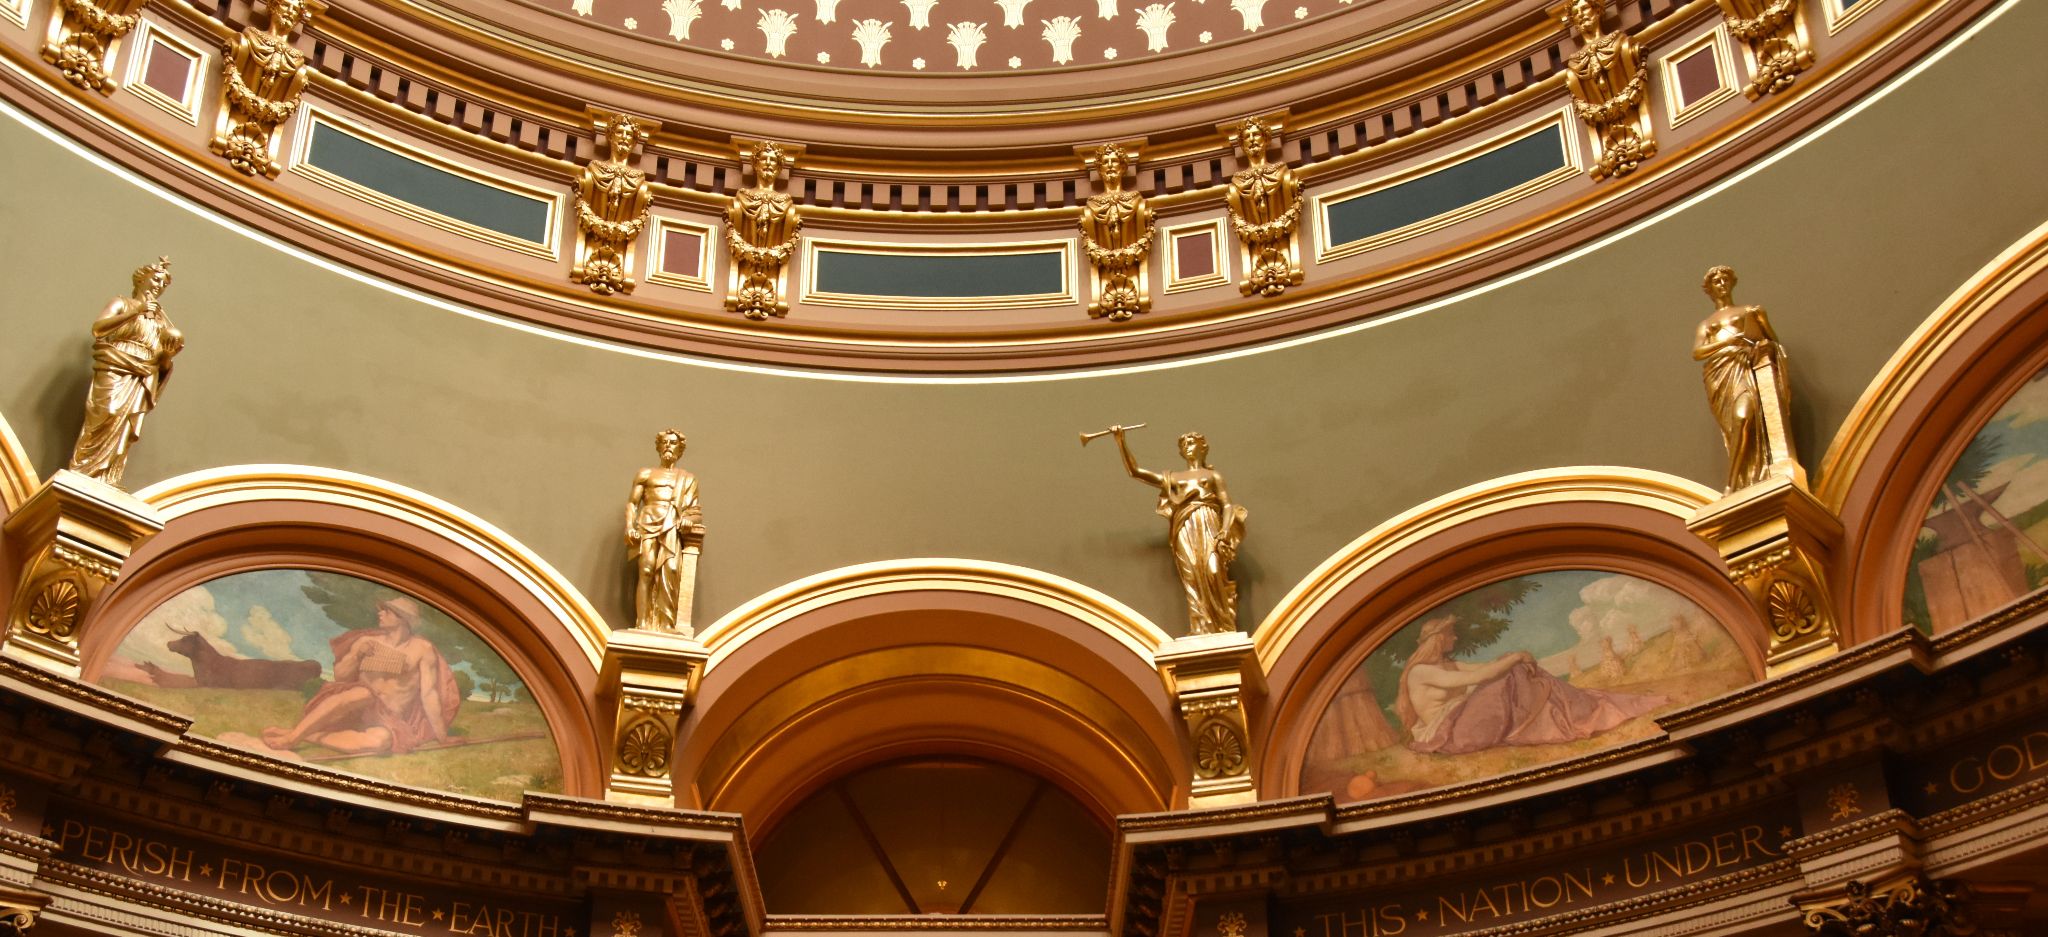 Iowa State Capitol (Second Floor States and Paintings - c), Des Moines, IA - 2016-06-30